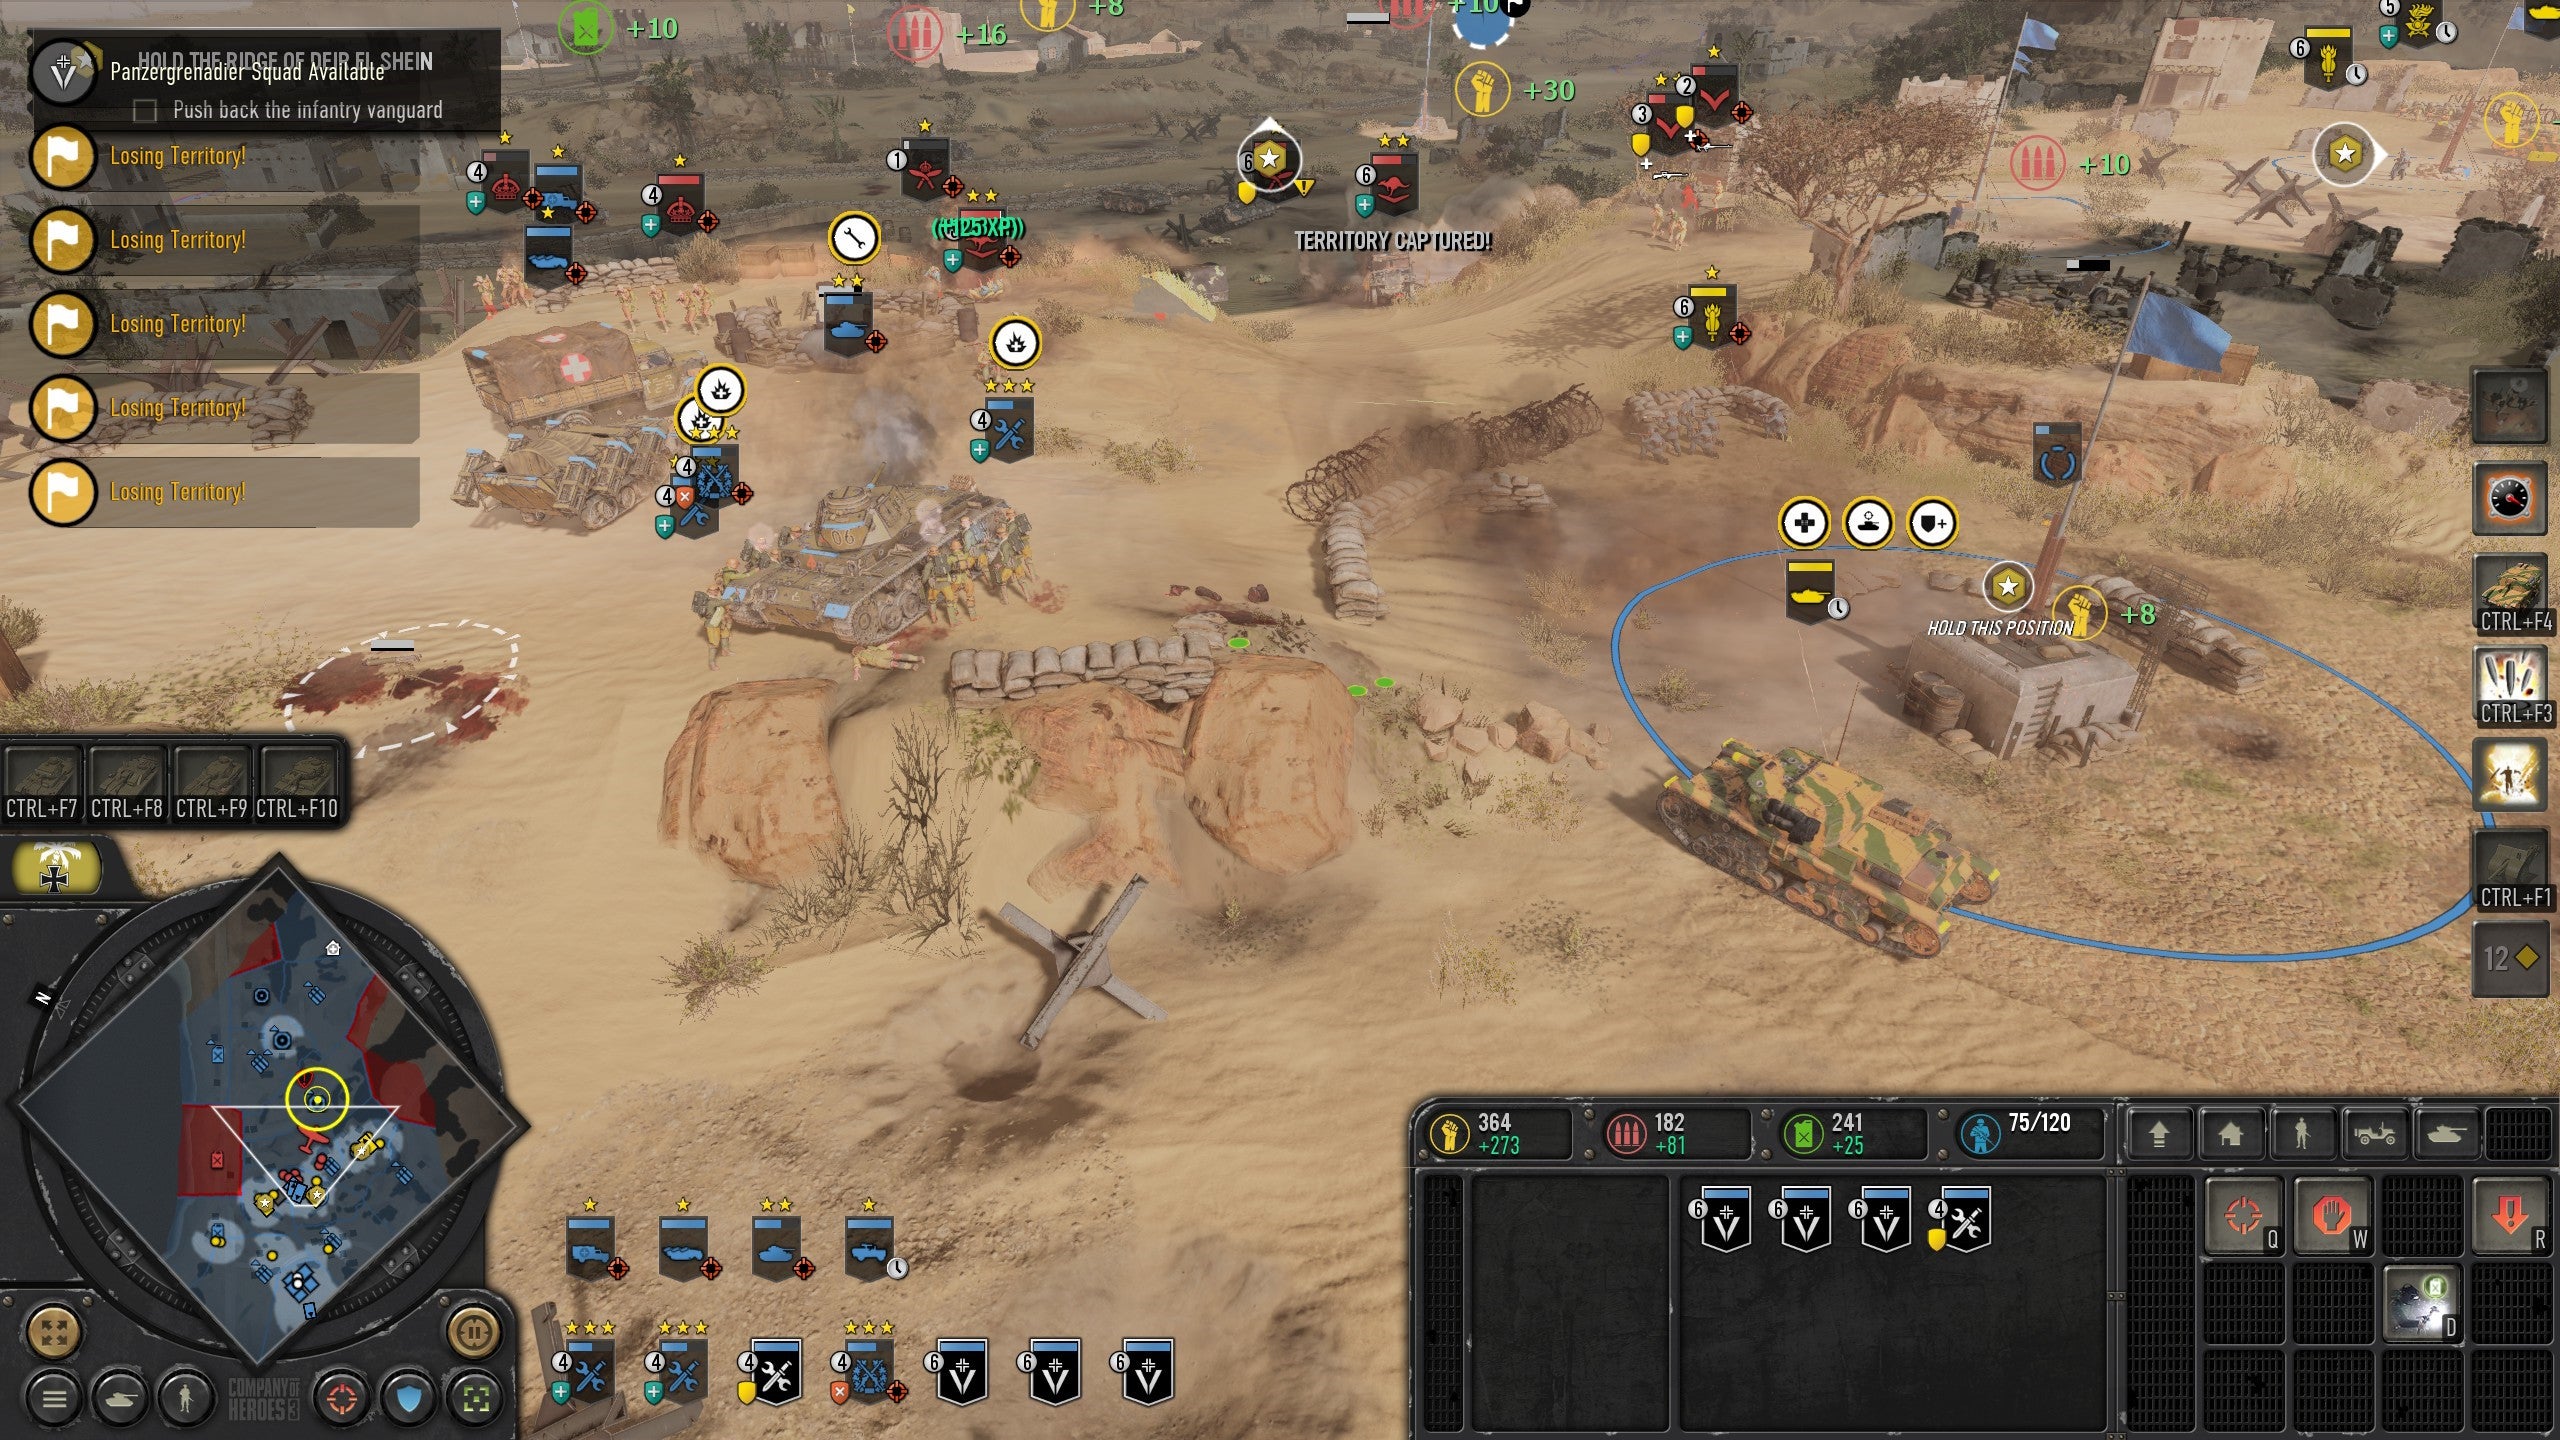 Tanks rush into a busy battleground in Company Of Heroes 3